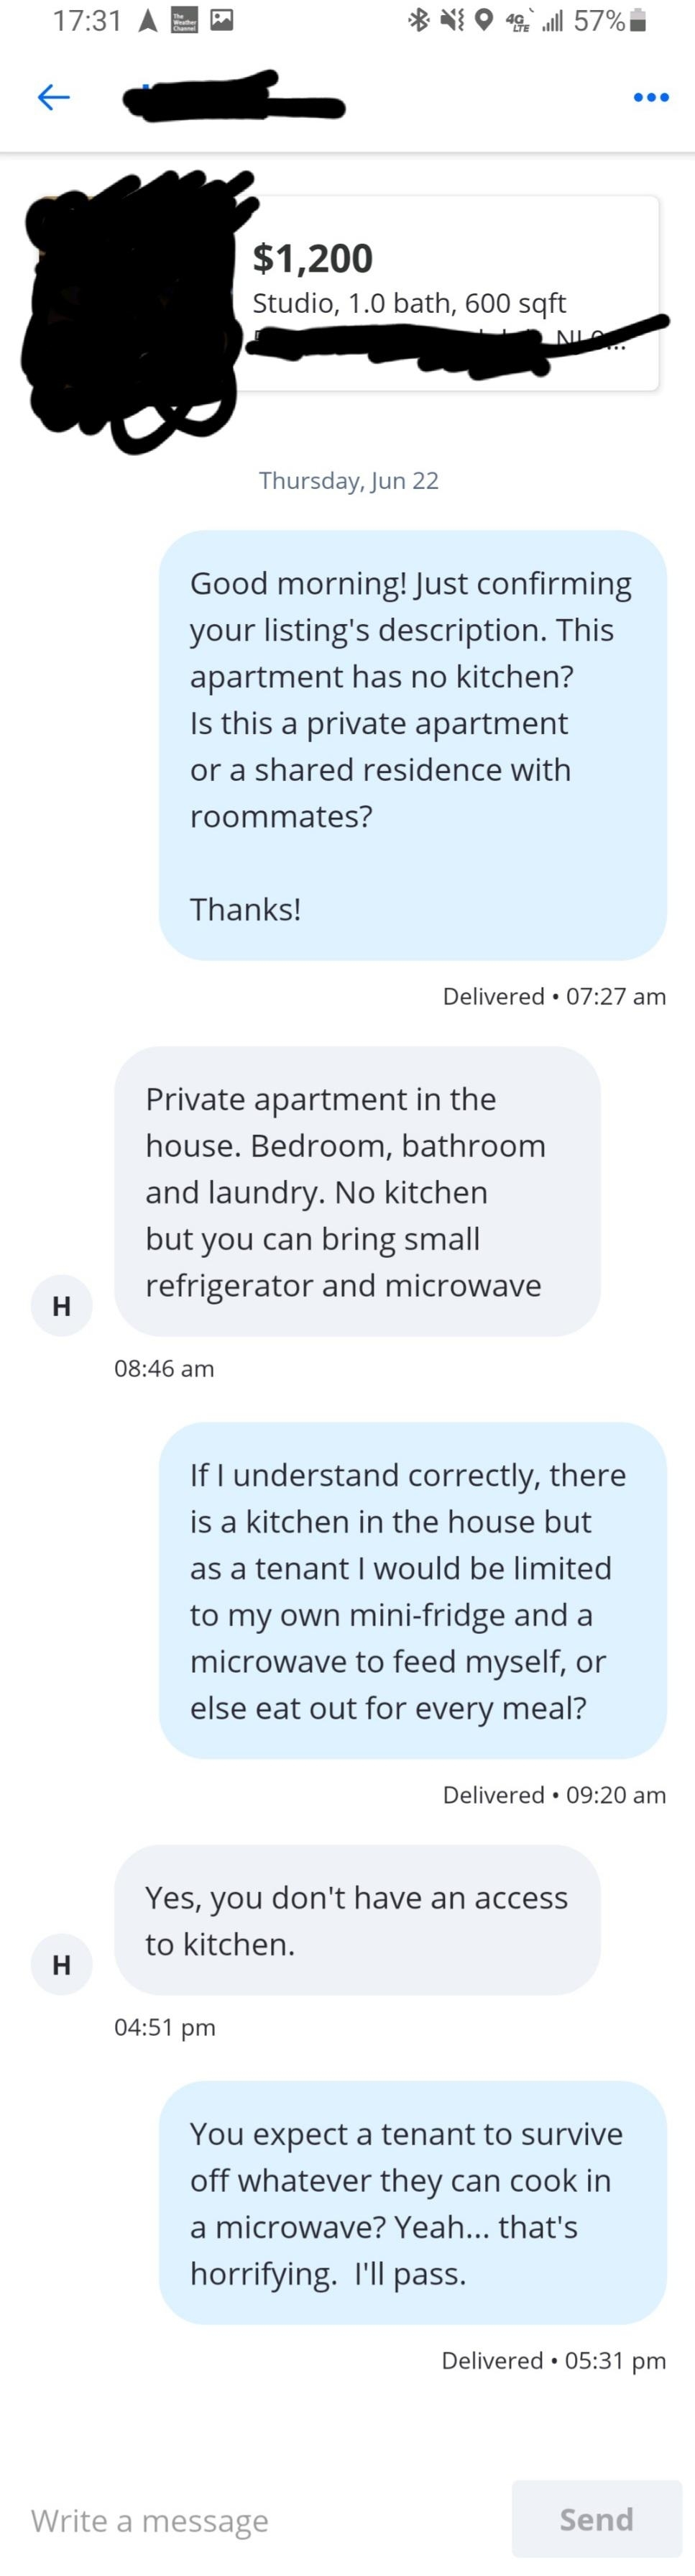 &quot;No kitchen but you can bring a small refrigerator and microwave.&quot;